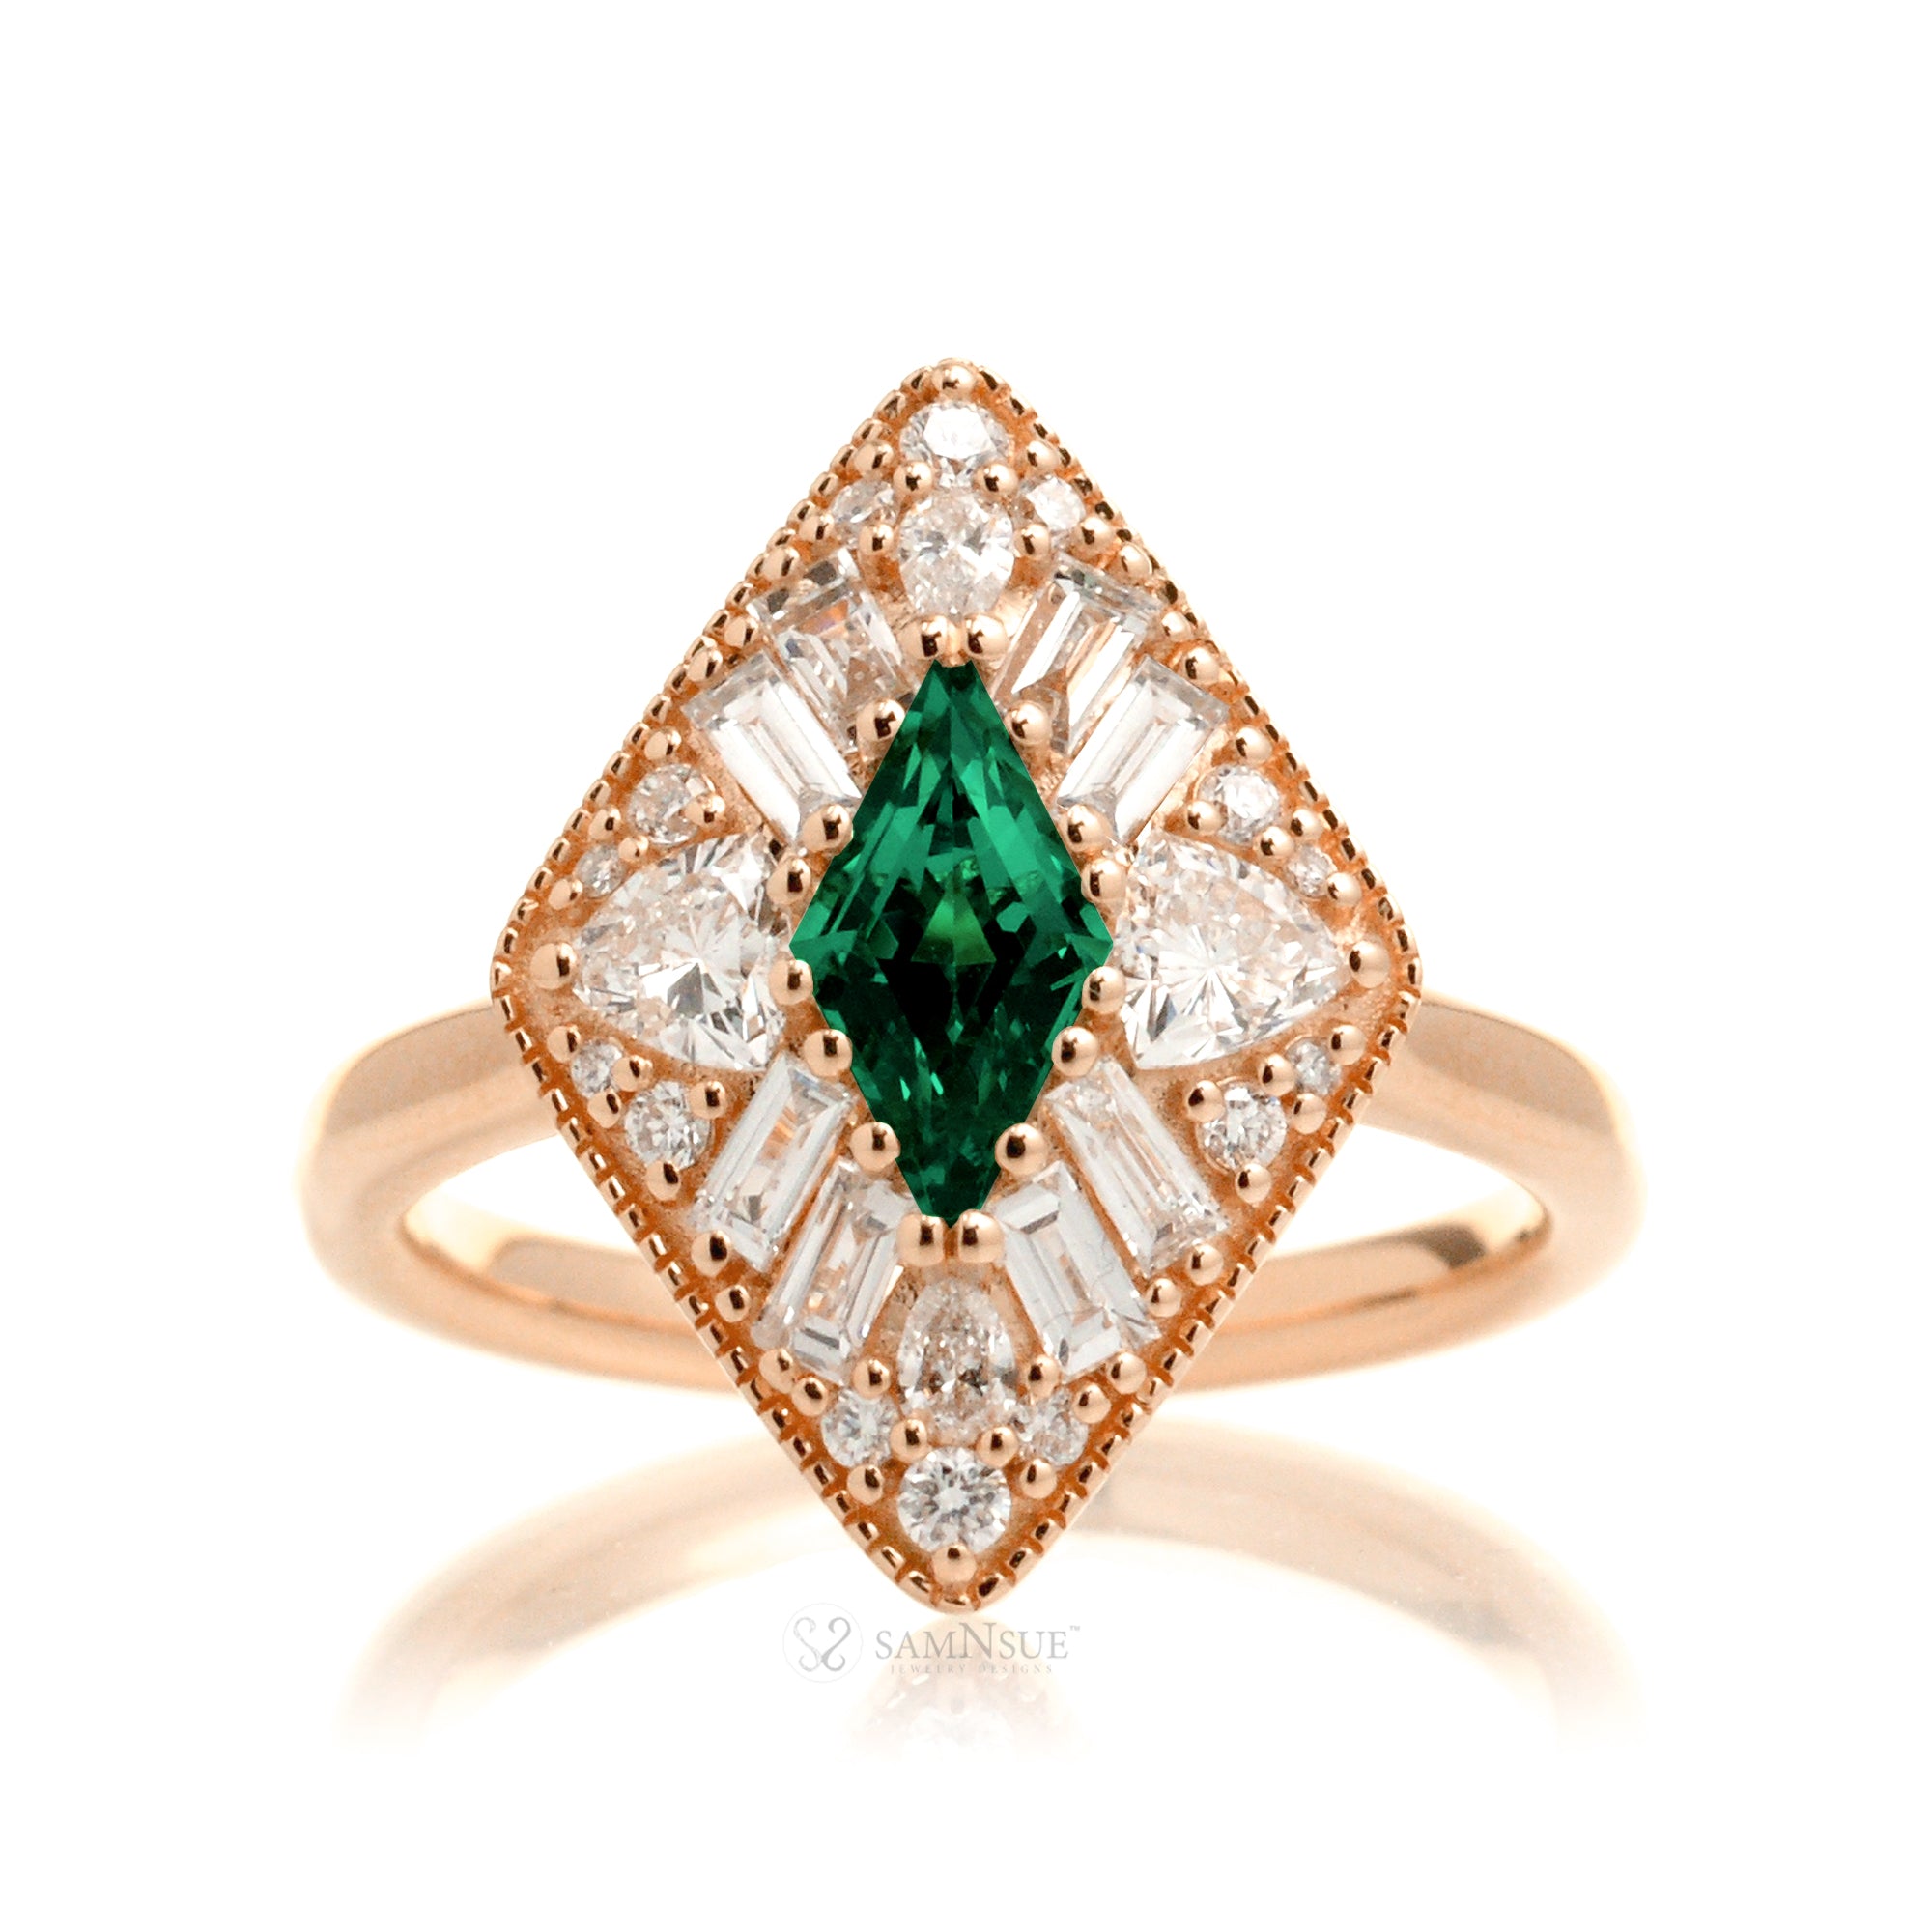 Kite cut green emerald and diamond vintage halo ring in rose gold